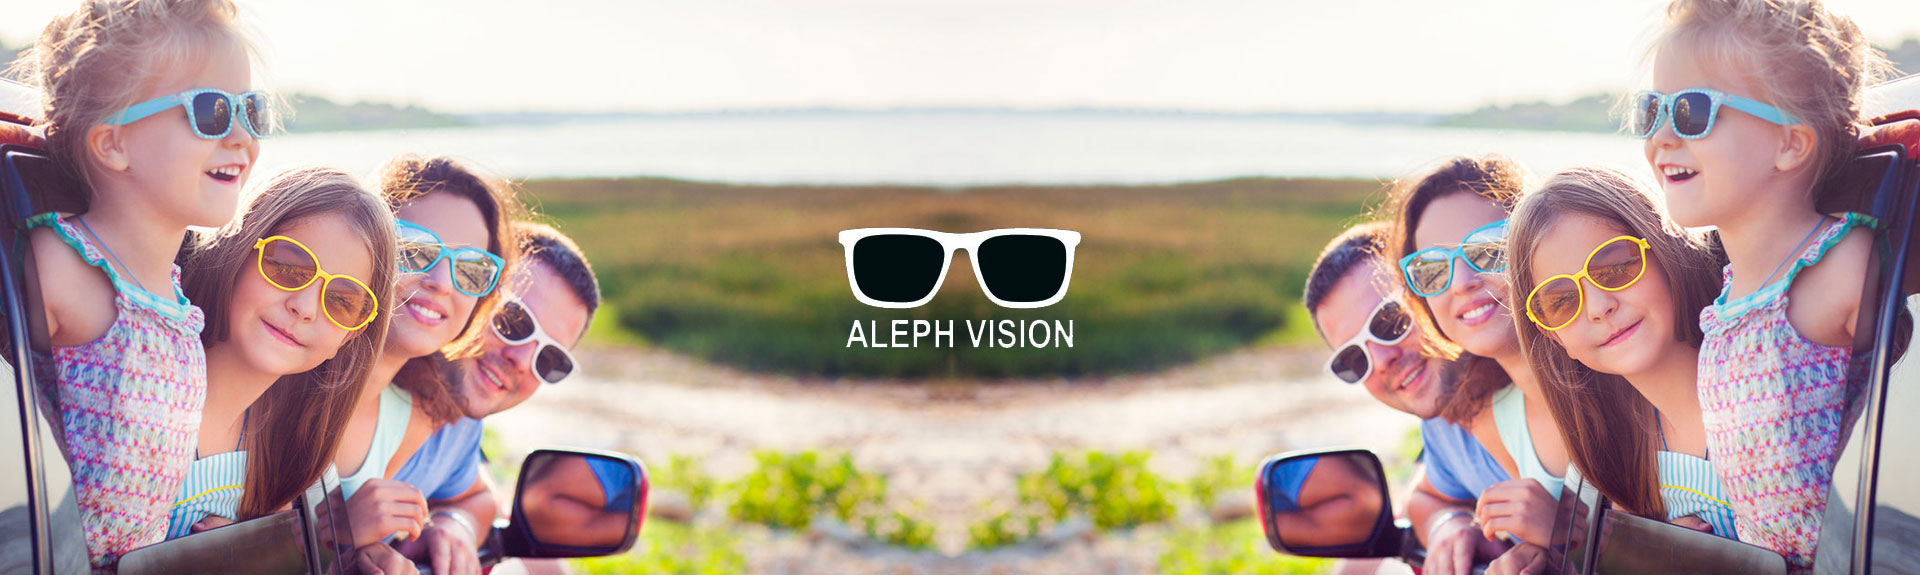 aleph vision-solaire